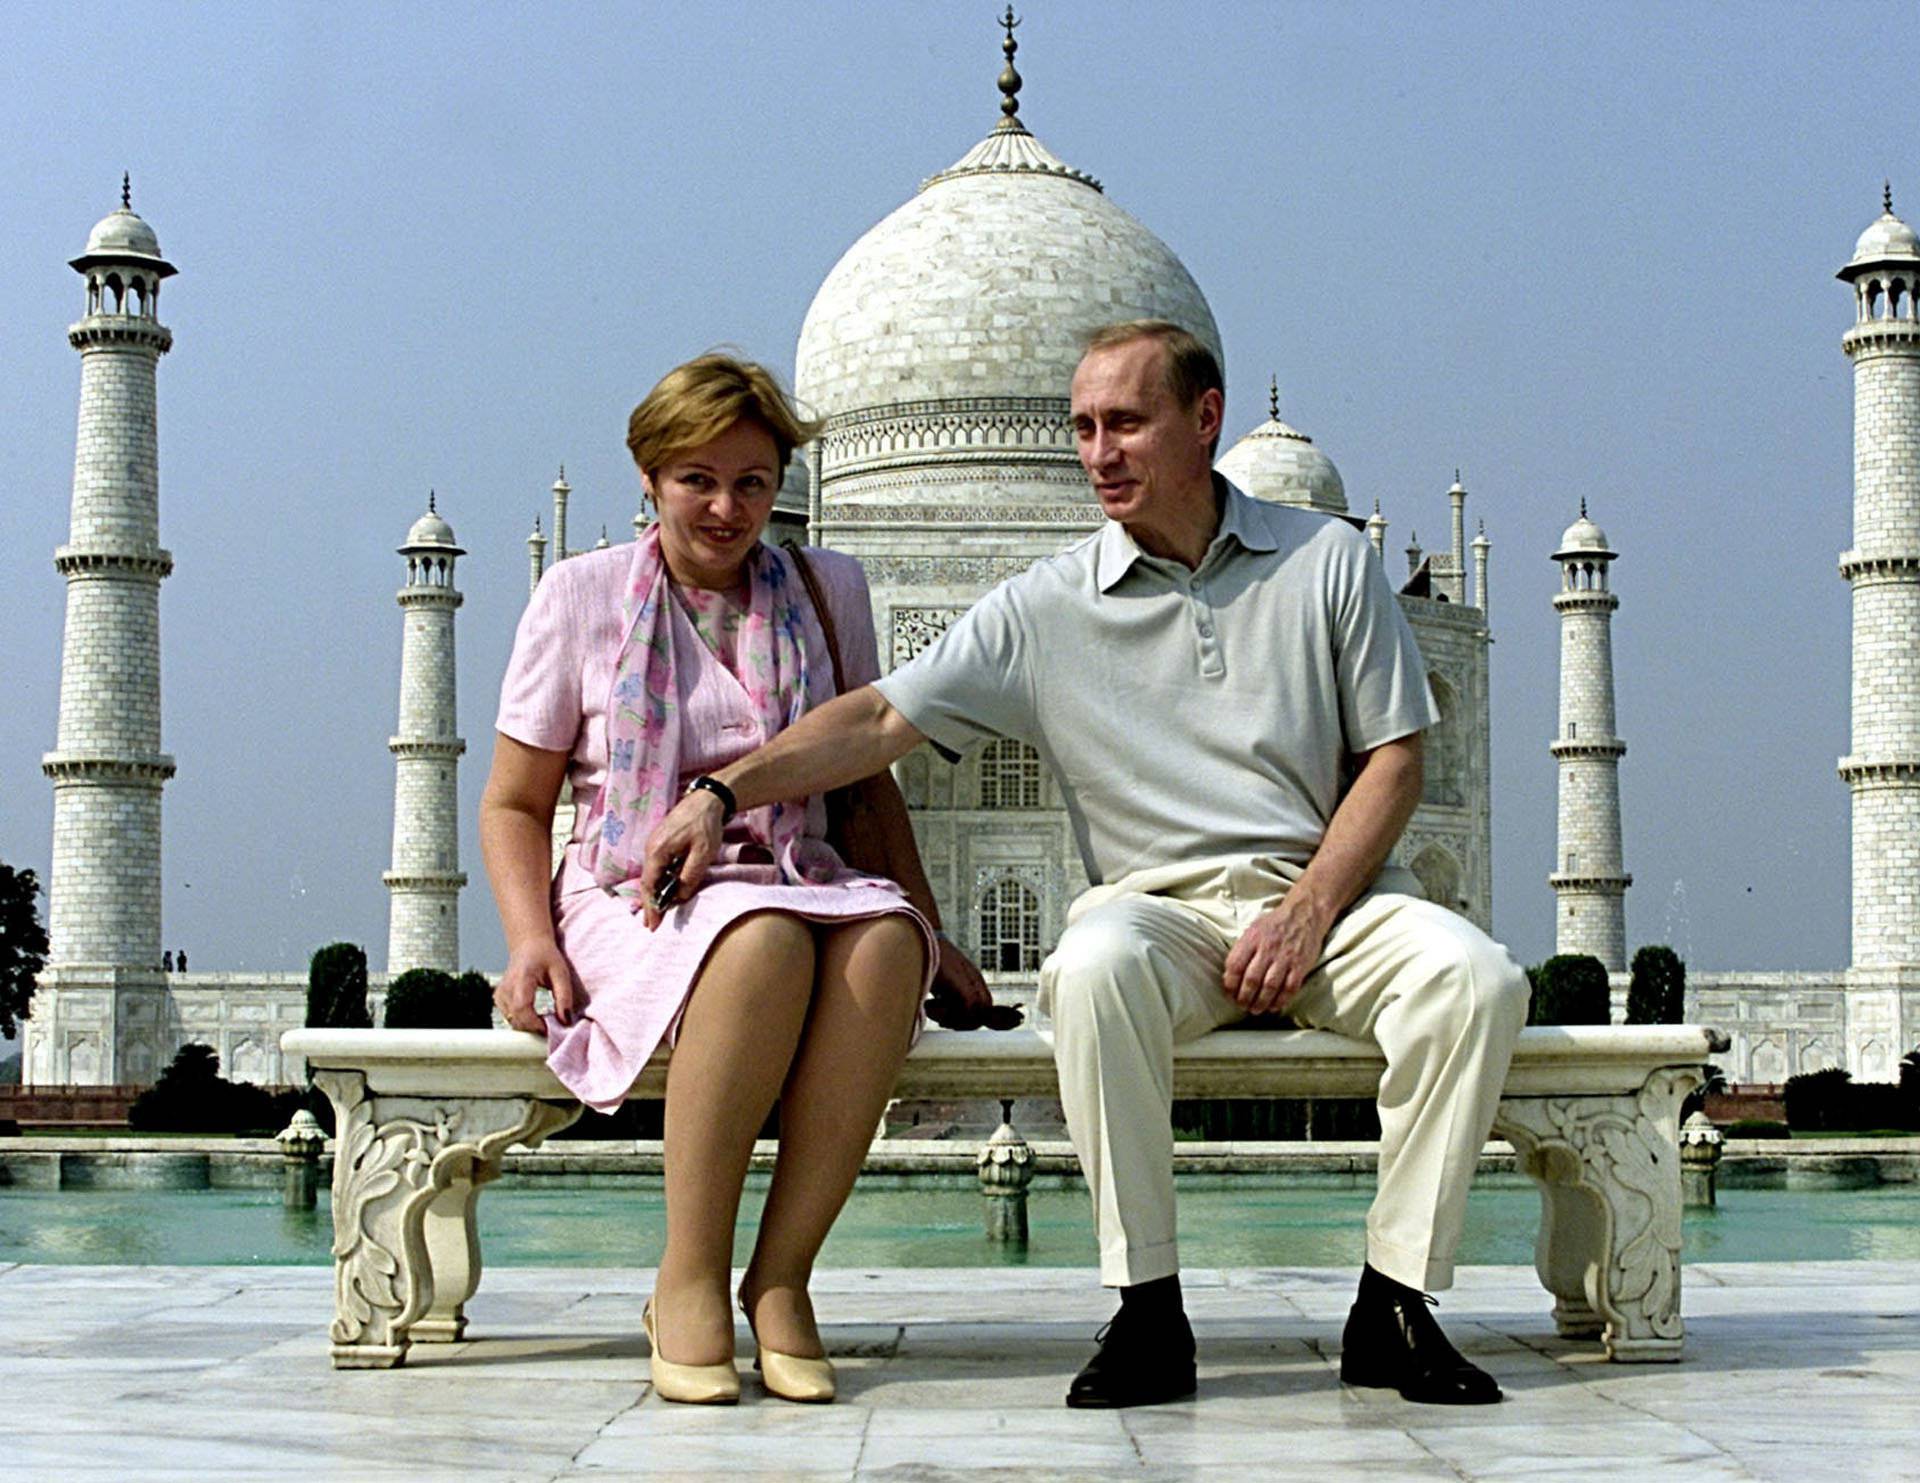 FILE PHOTO: Putin and his wife Lyudmila sit in front of the Taj Mahal while touring Agra